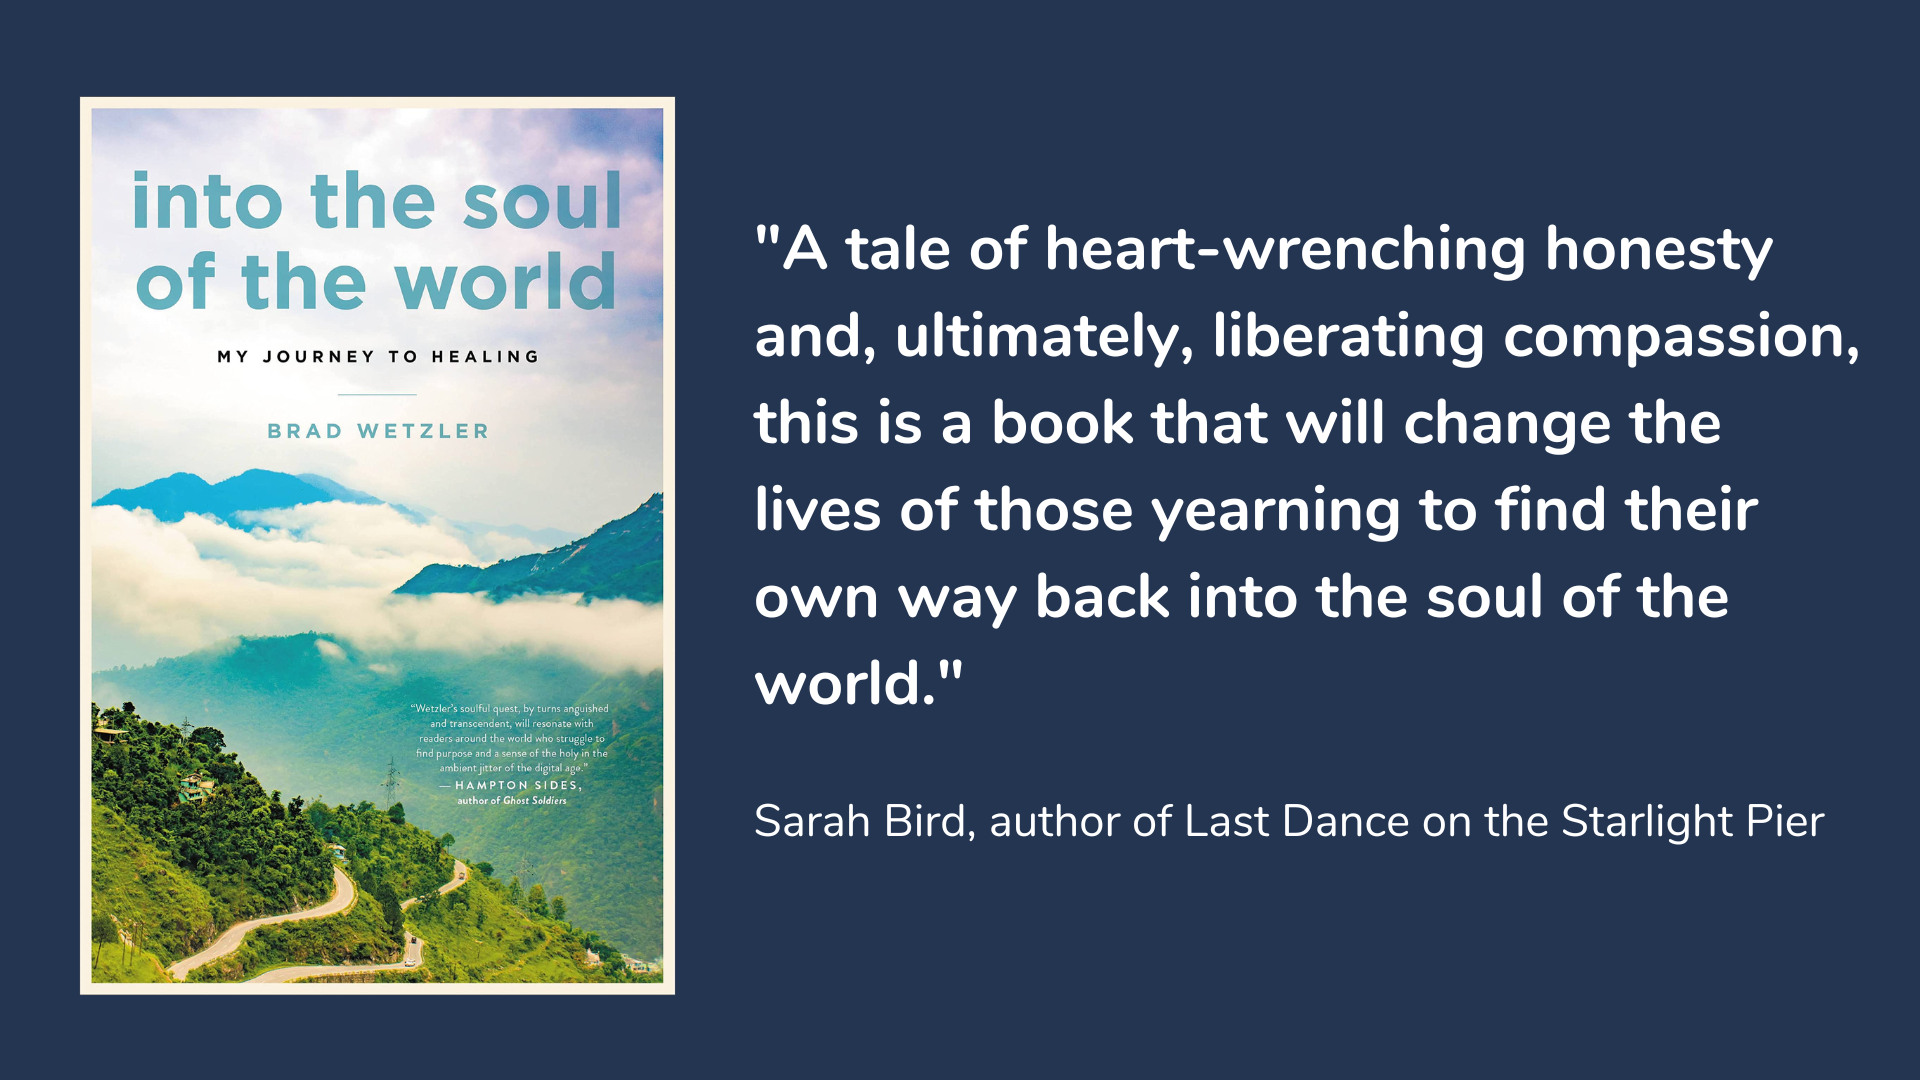 Into the Soul of the World: My Journey to Healing, book cover and description.